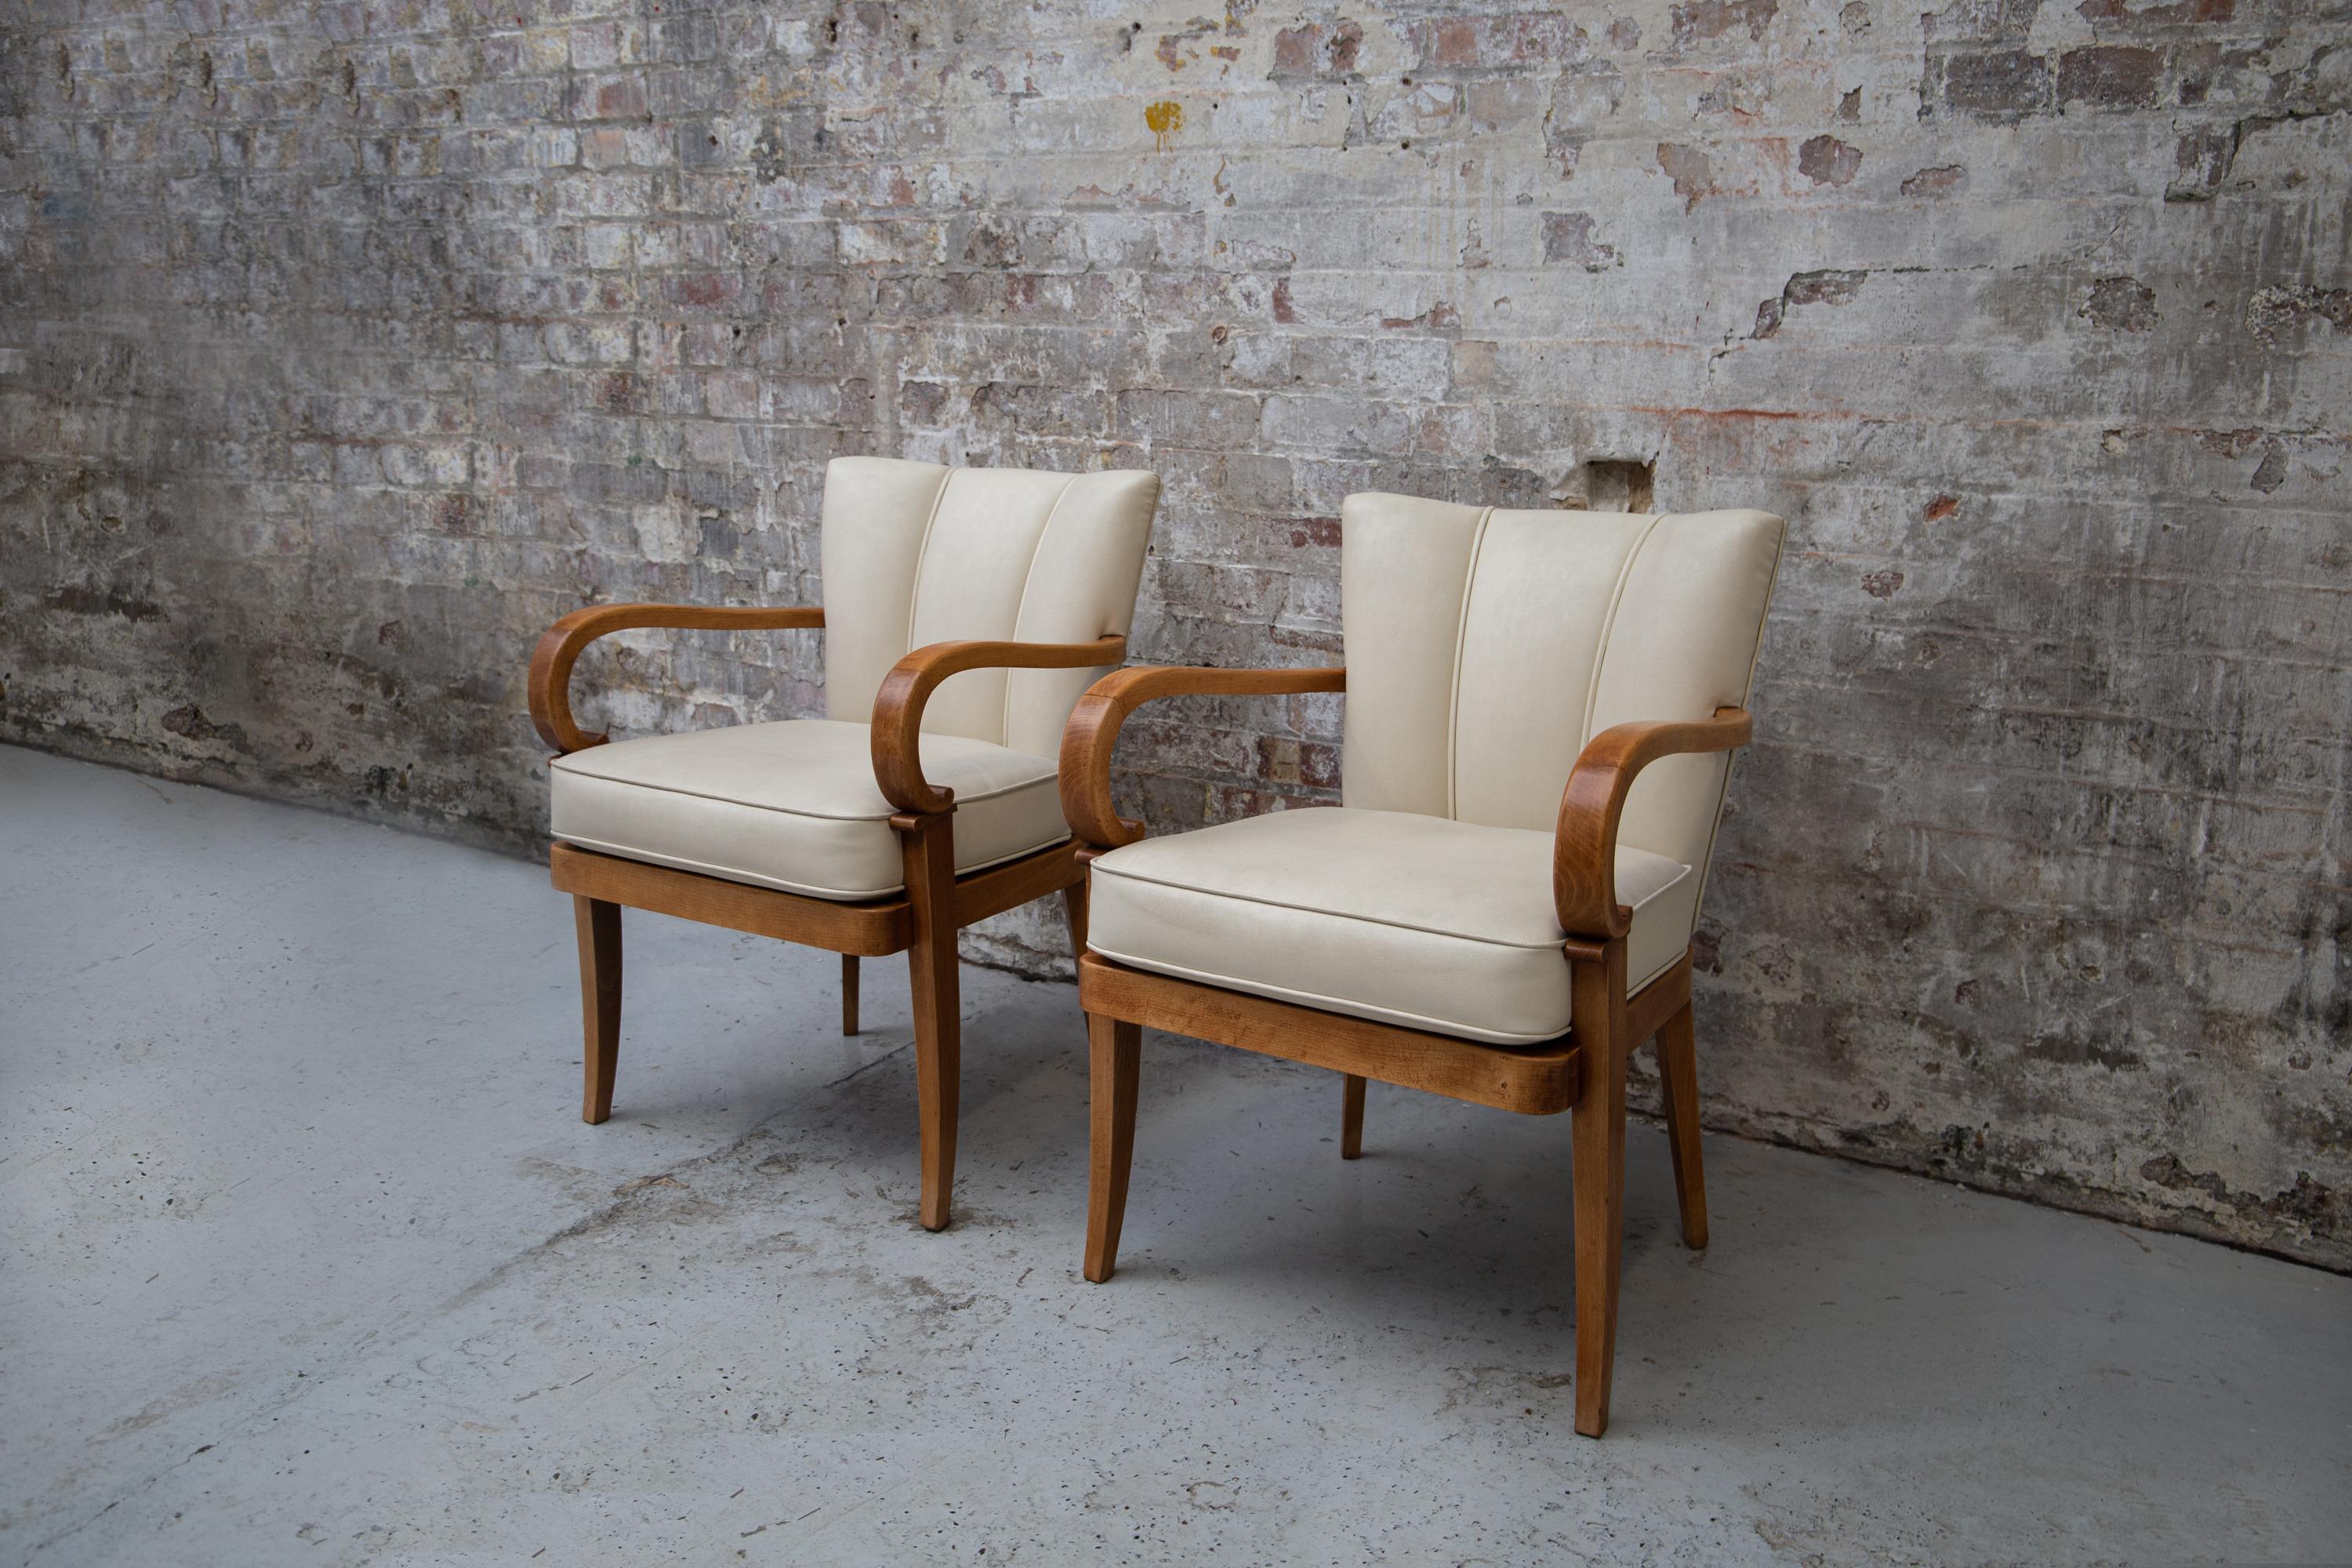 Exquisite form, patina and quality. With scroll arms, sabre legs and elliptical scalloped back.
Finished in Skai nappa faux leather.
   